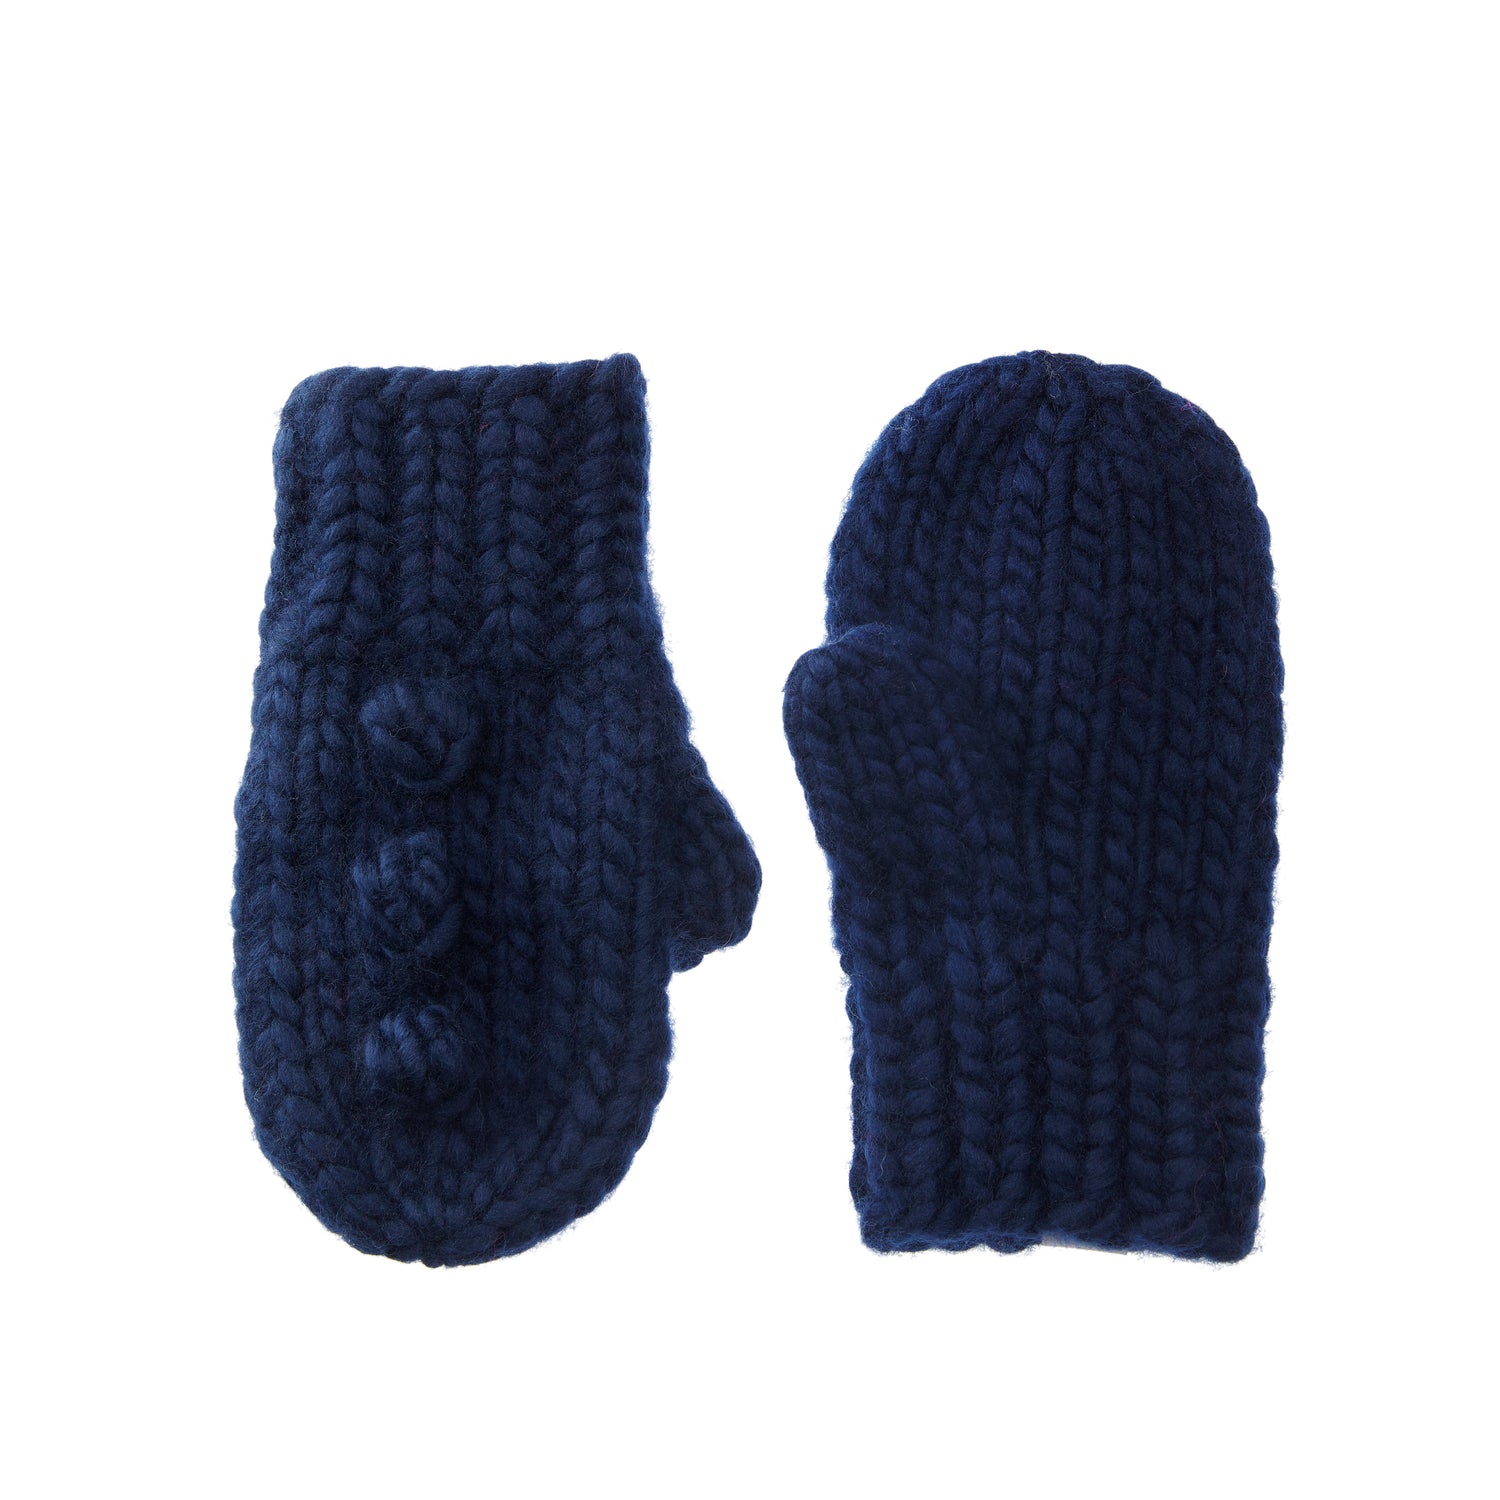 The Toddler Lil Campbell Mittens